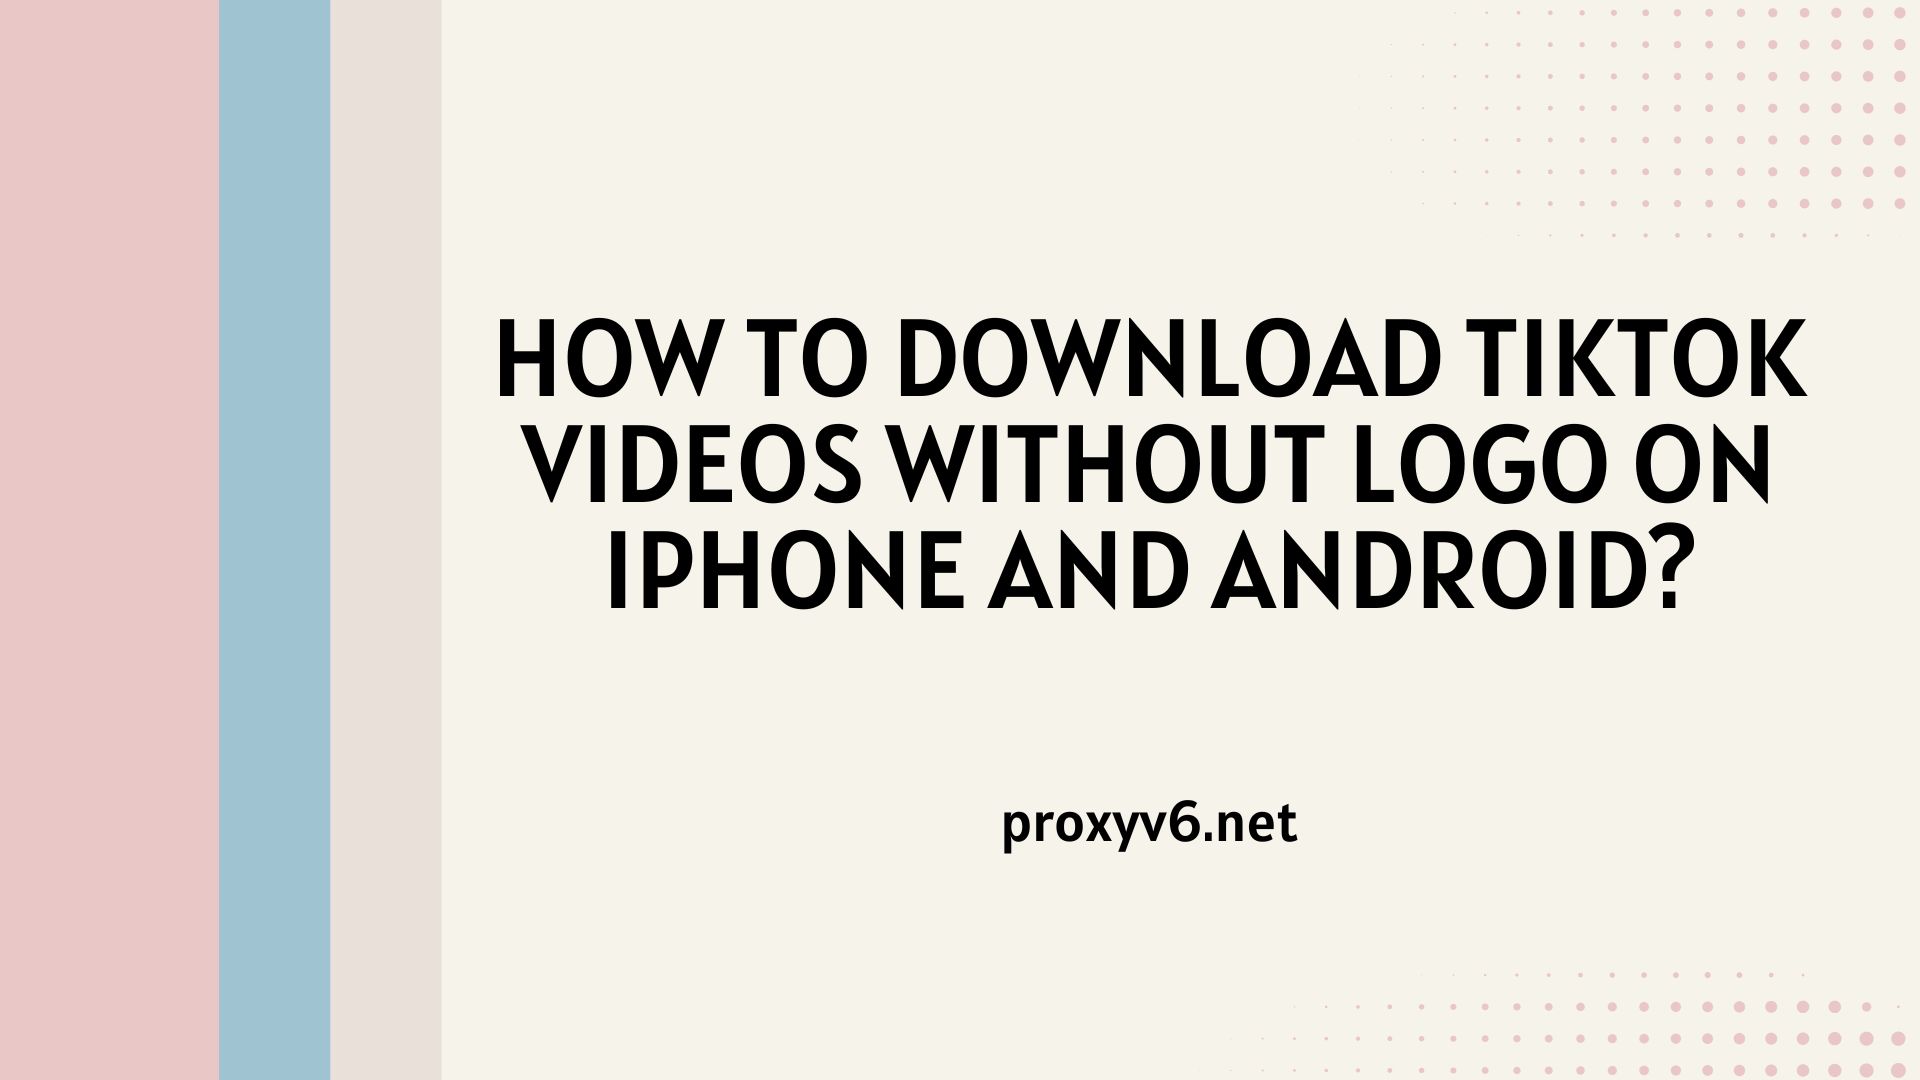 How to download tiktok videos without logo on iphone and android?